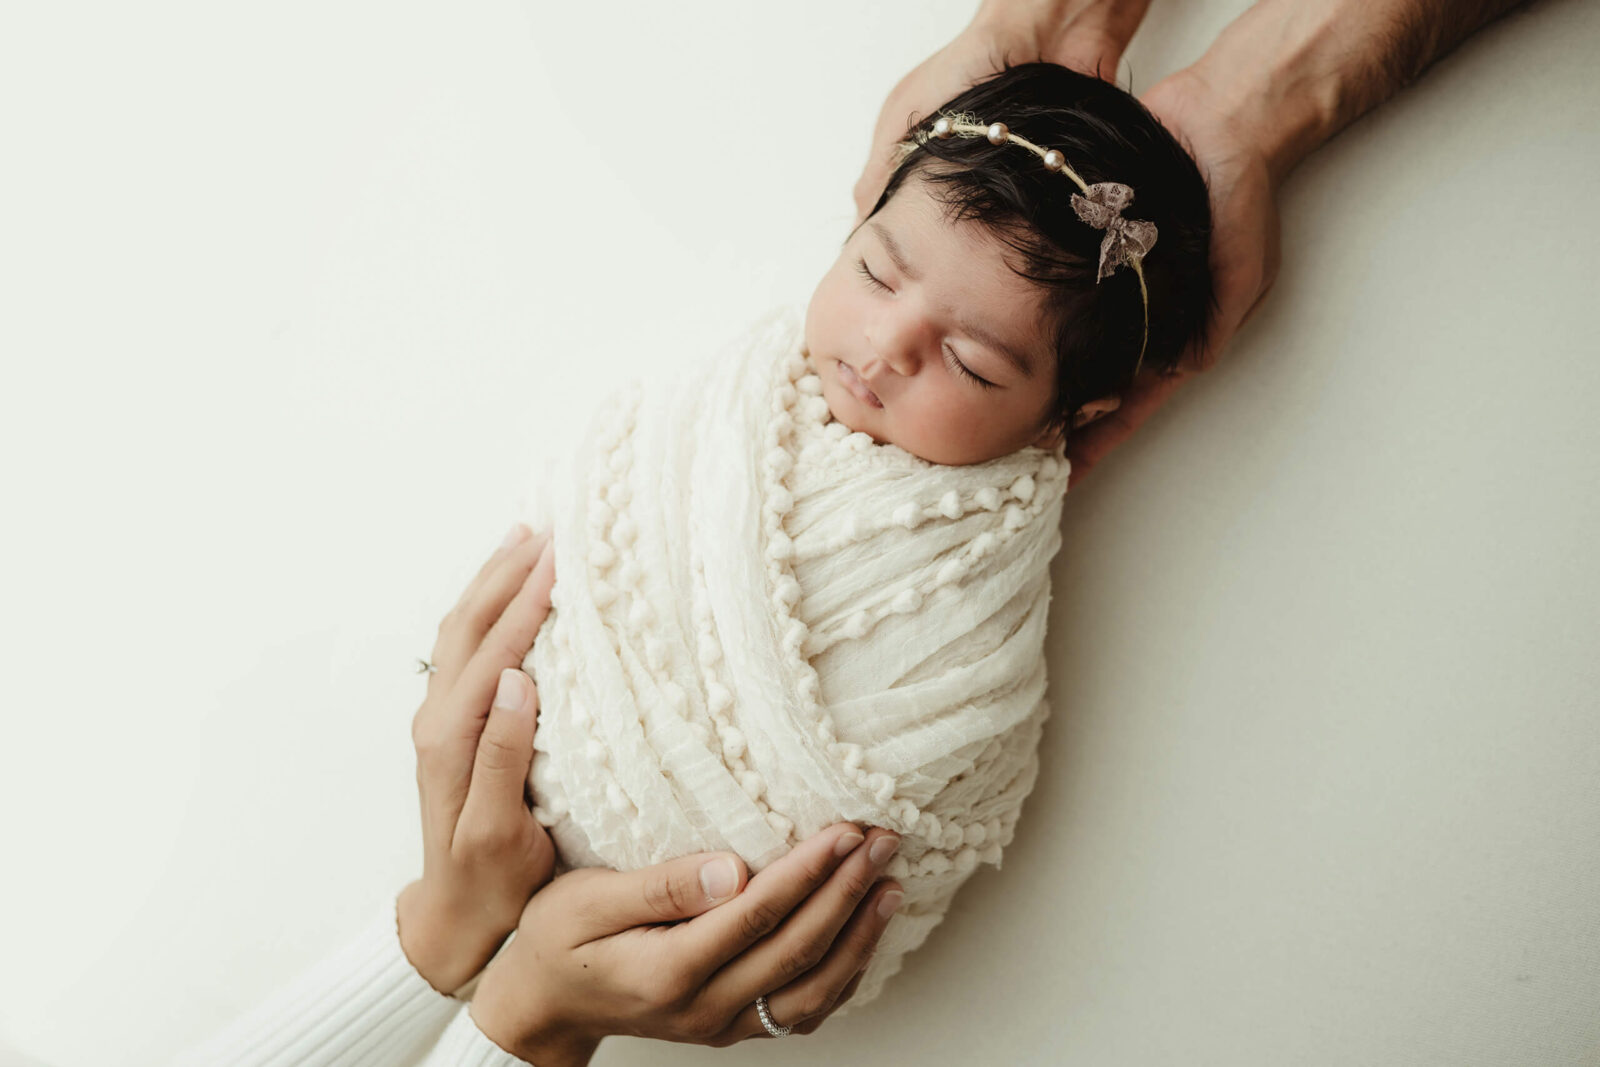 Unique newborn photography with parents, baby girl wrapped in white blanket with parents hands on her head and body